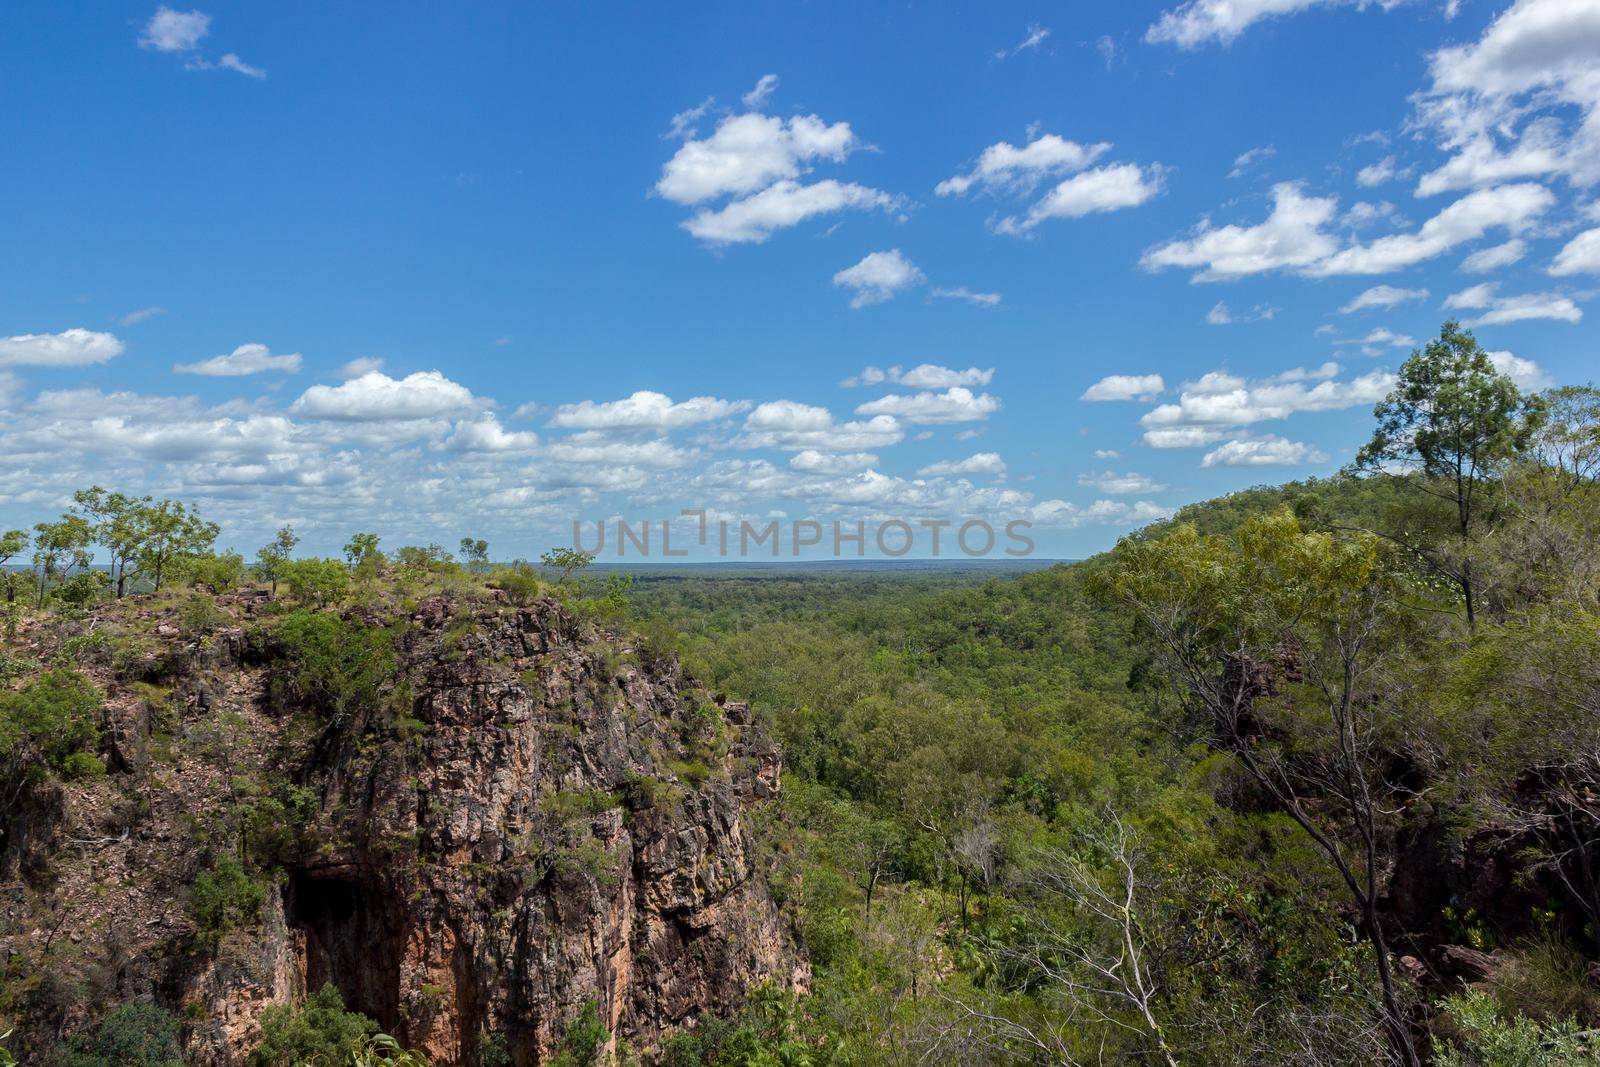 View from the top of the mountain in Litchfield and Kakadu National Park in Australia, showing a scenic grass landscapes with a few trees and bushes and termite hills and homes.